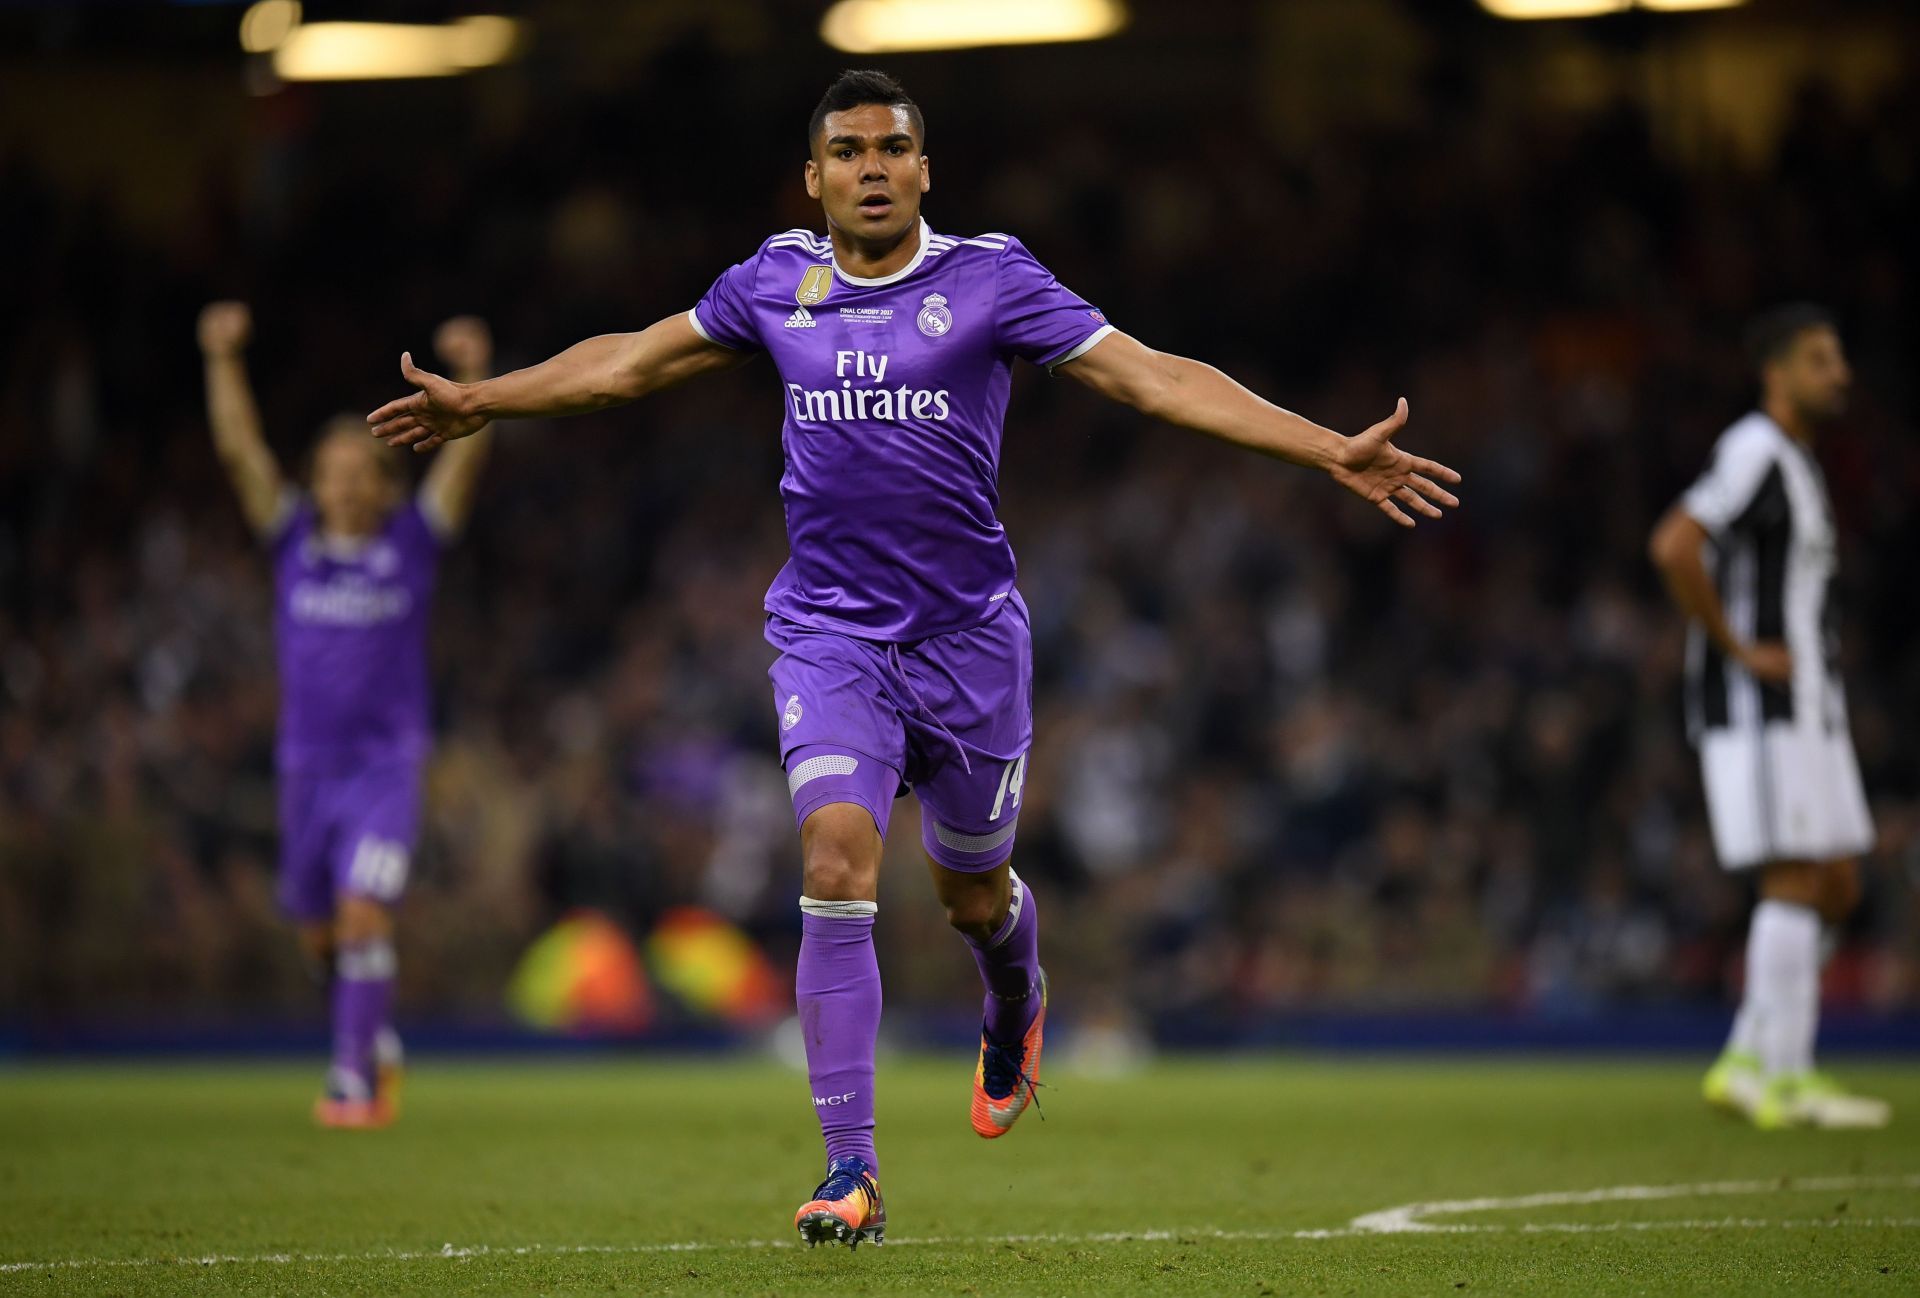 Casemiro is arguably one of the best defensive midfielders in the world right now